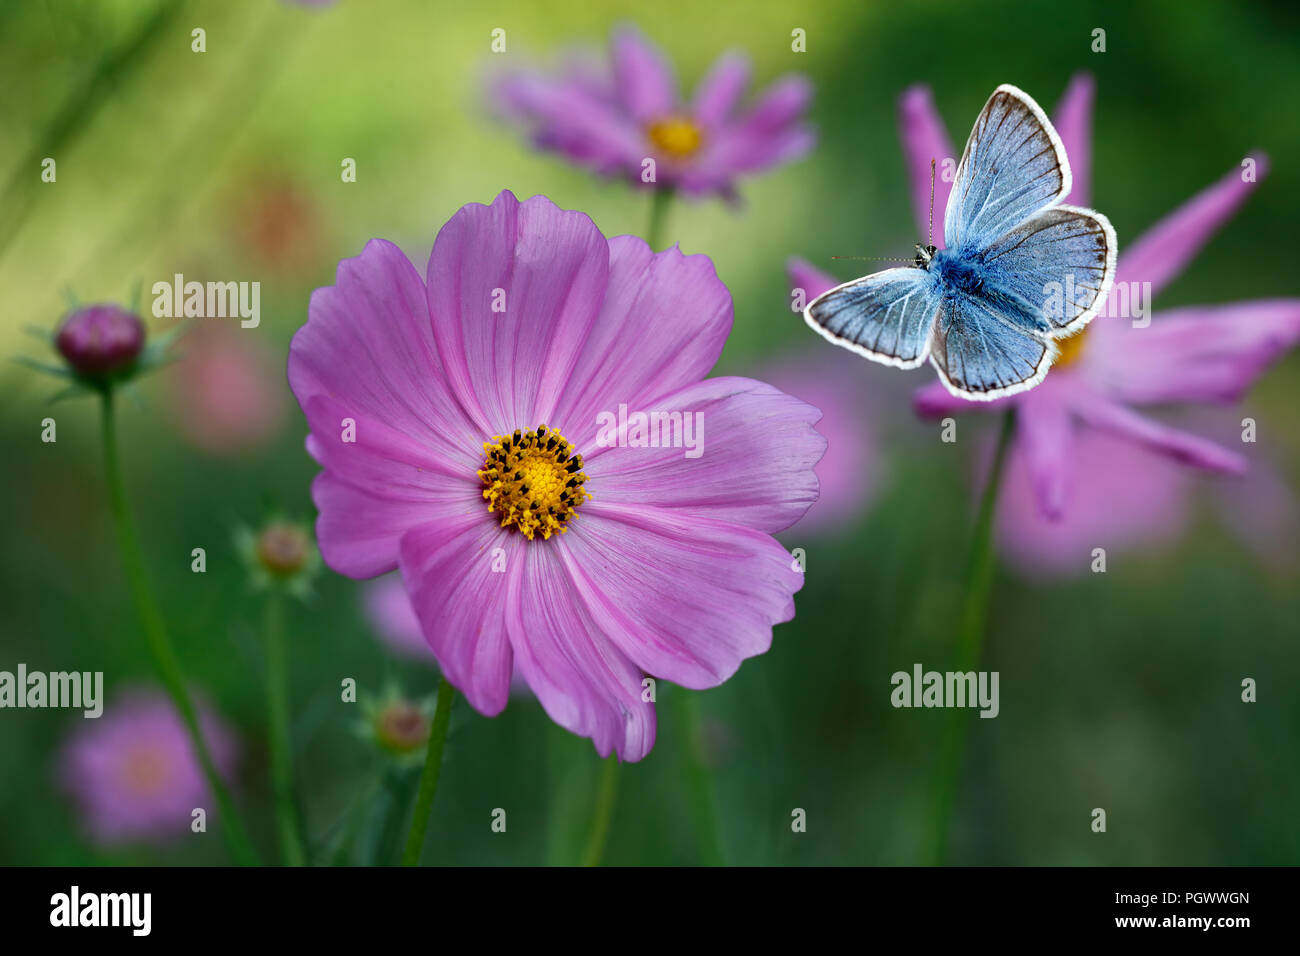 The blue butterfly Lycaenidae family flying among pink cosmos flowers with blurred flowers and green background Stock Photo